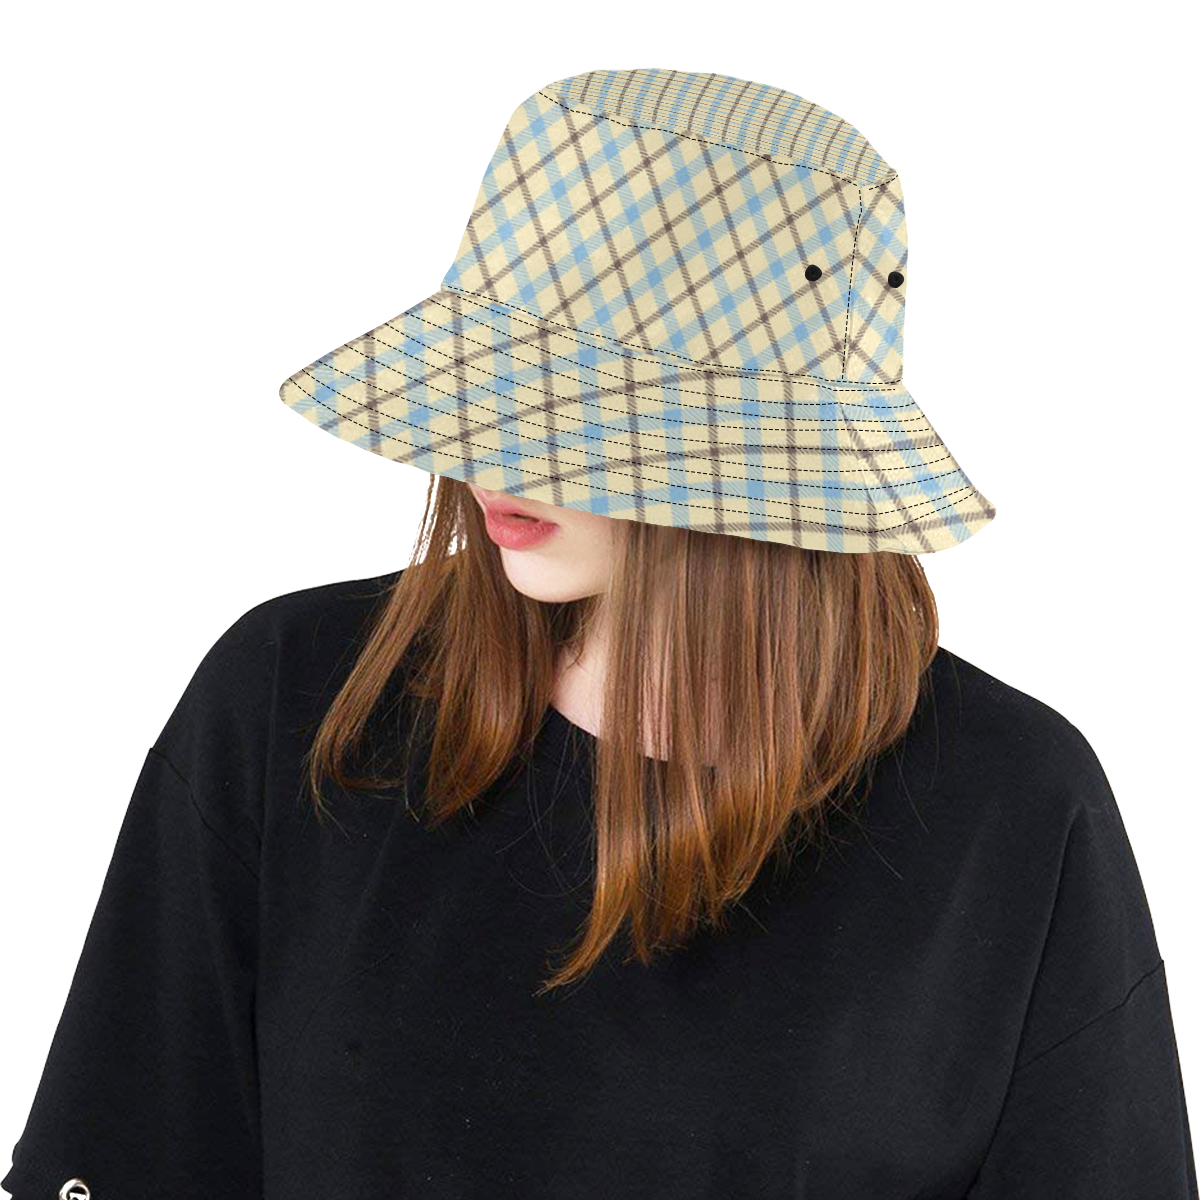 Plaid 2 plain tartan in cream, brown and blue All Over Print Bucket Hat